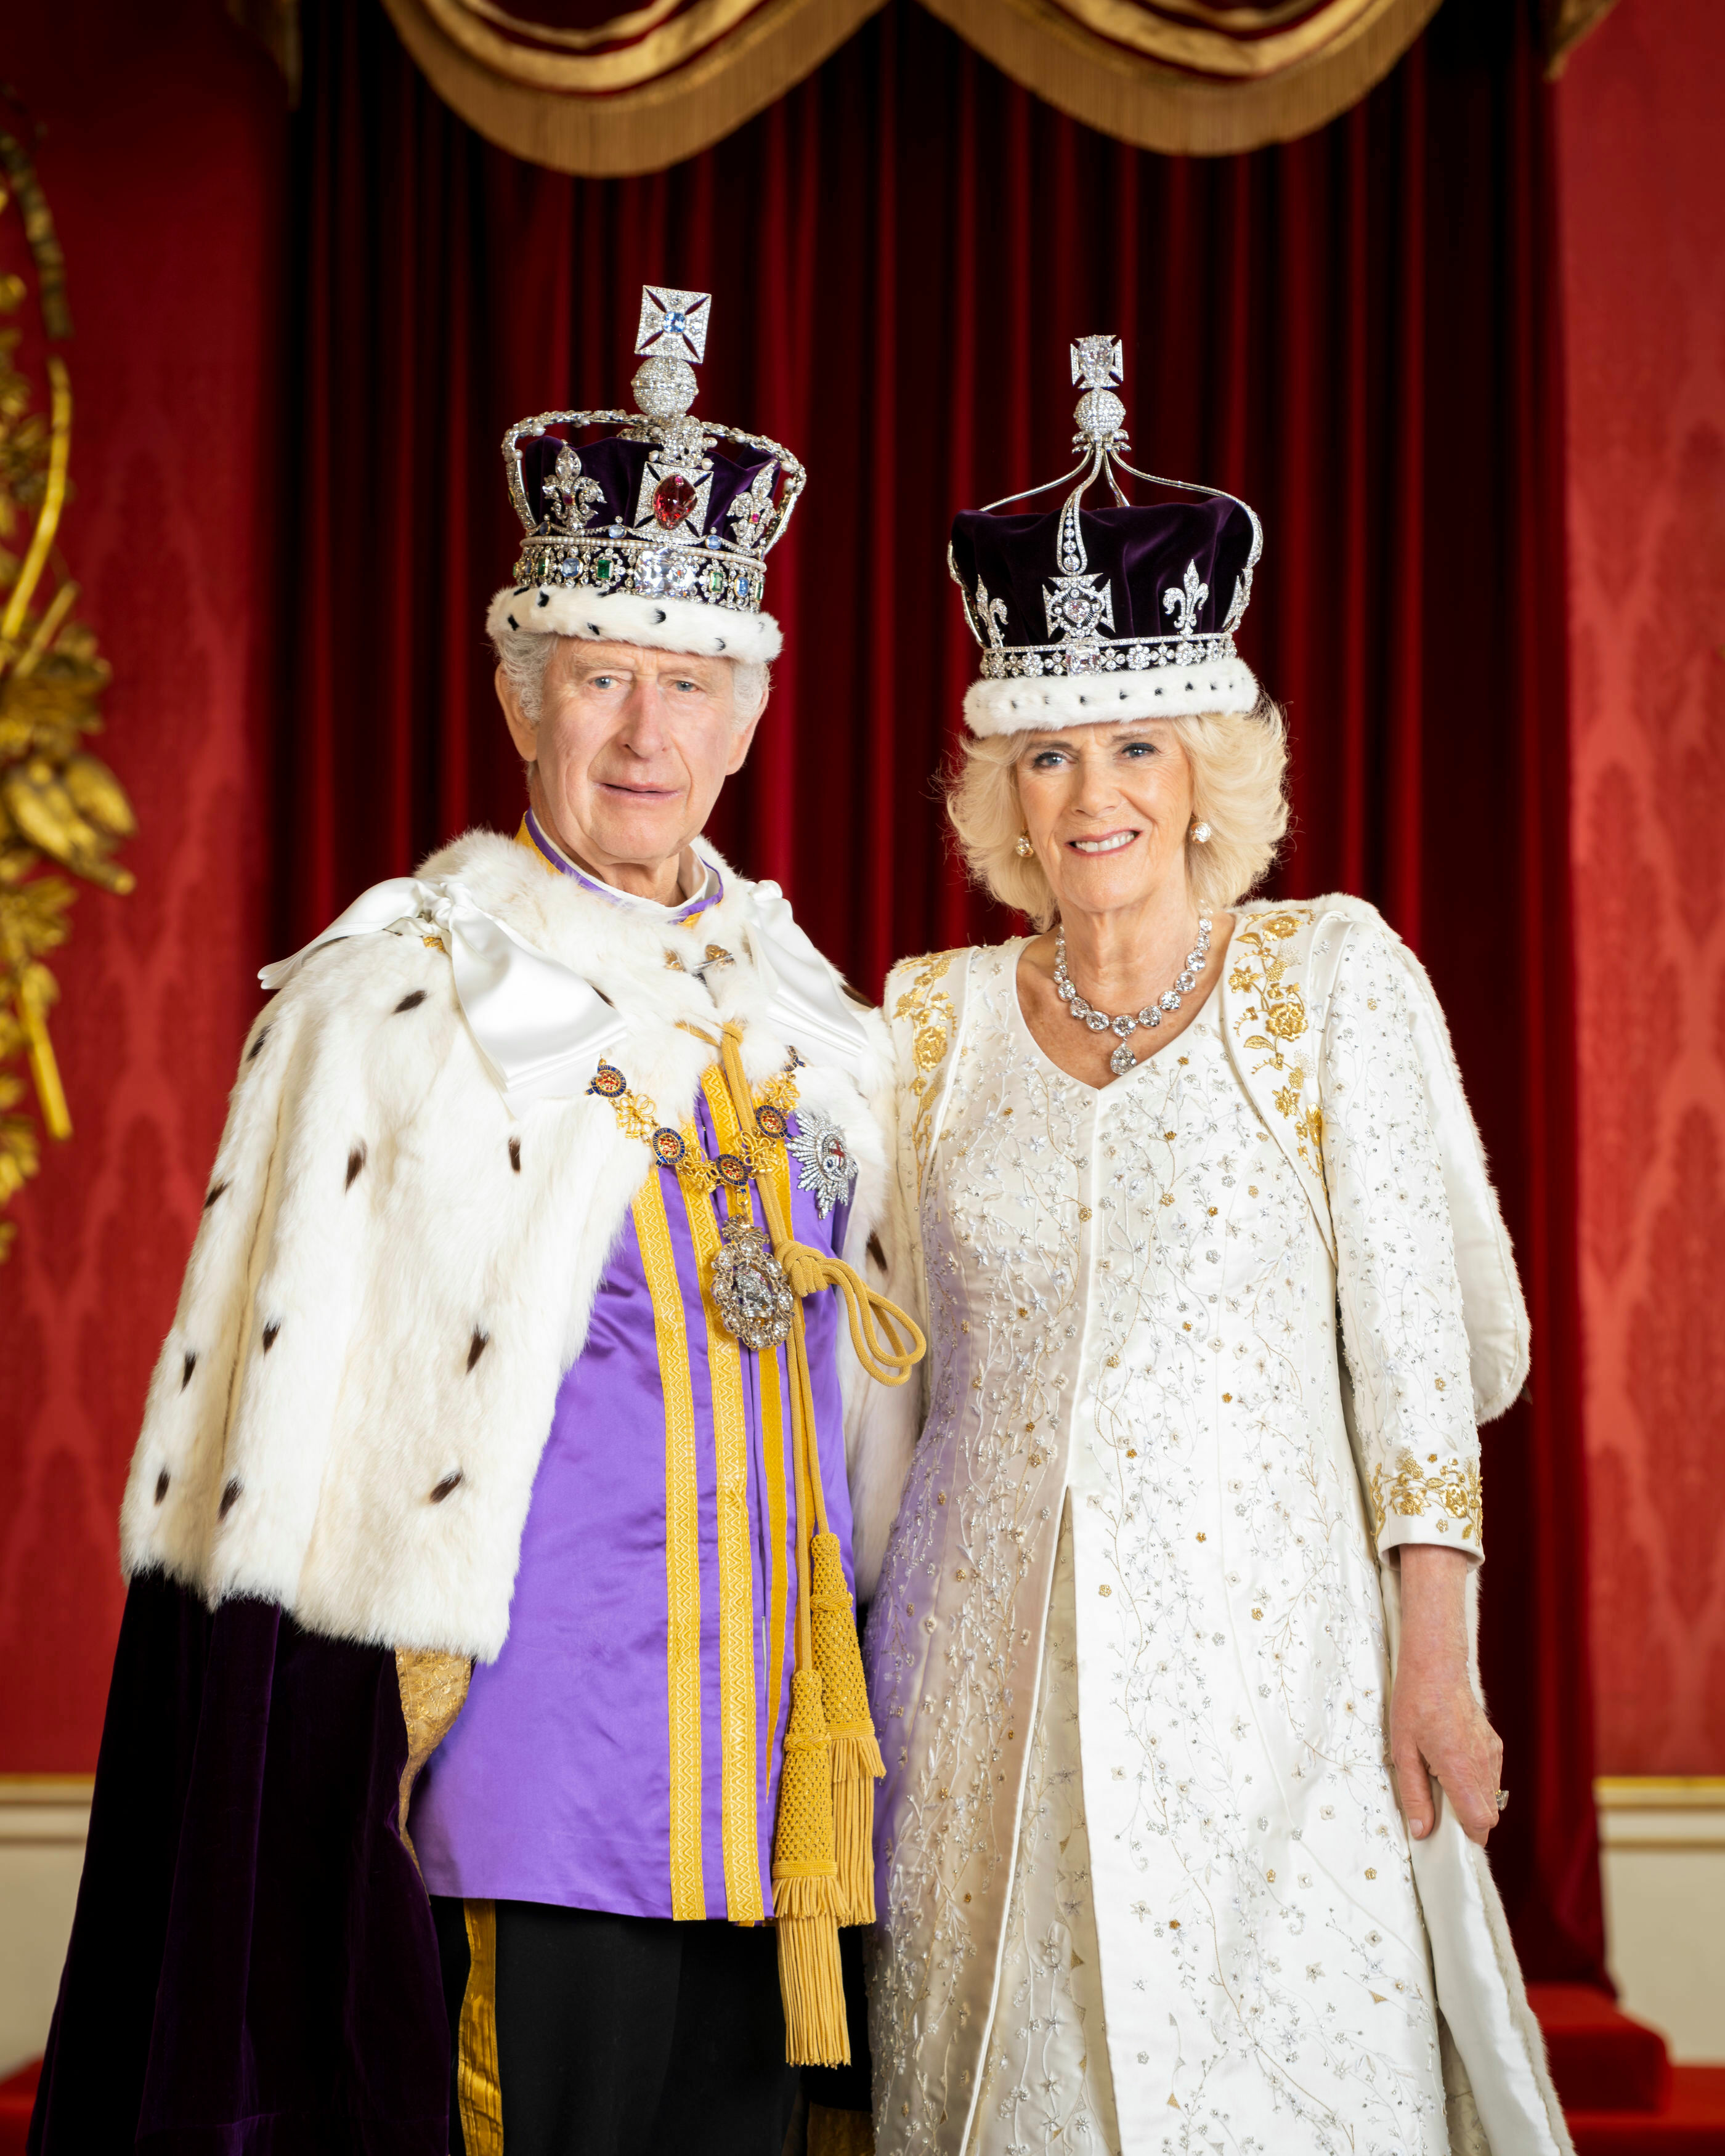 <p><span>King Charles III and Queen Camilla are pictured in the Throne Room at Buckingham Palace in London in one of four official </span><a href="https://www.wonderwall.com/celebrity/the-coronation-of-king-charles-iii-and-queen-camilla-the-best-pictures-of-all-the-royals-at-this-historic-event-735015.gallery">coronation</a><span> portraits released to the public on May 8, 2023.</span></p>